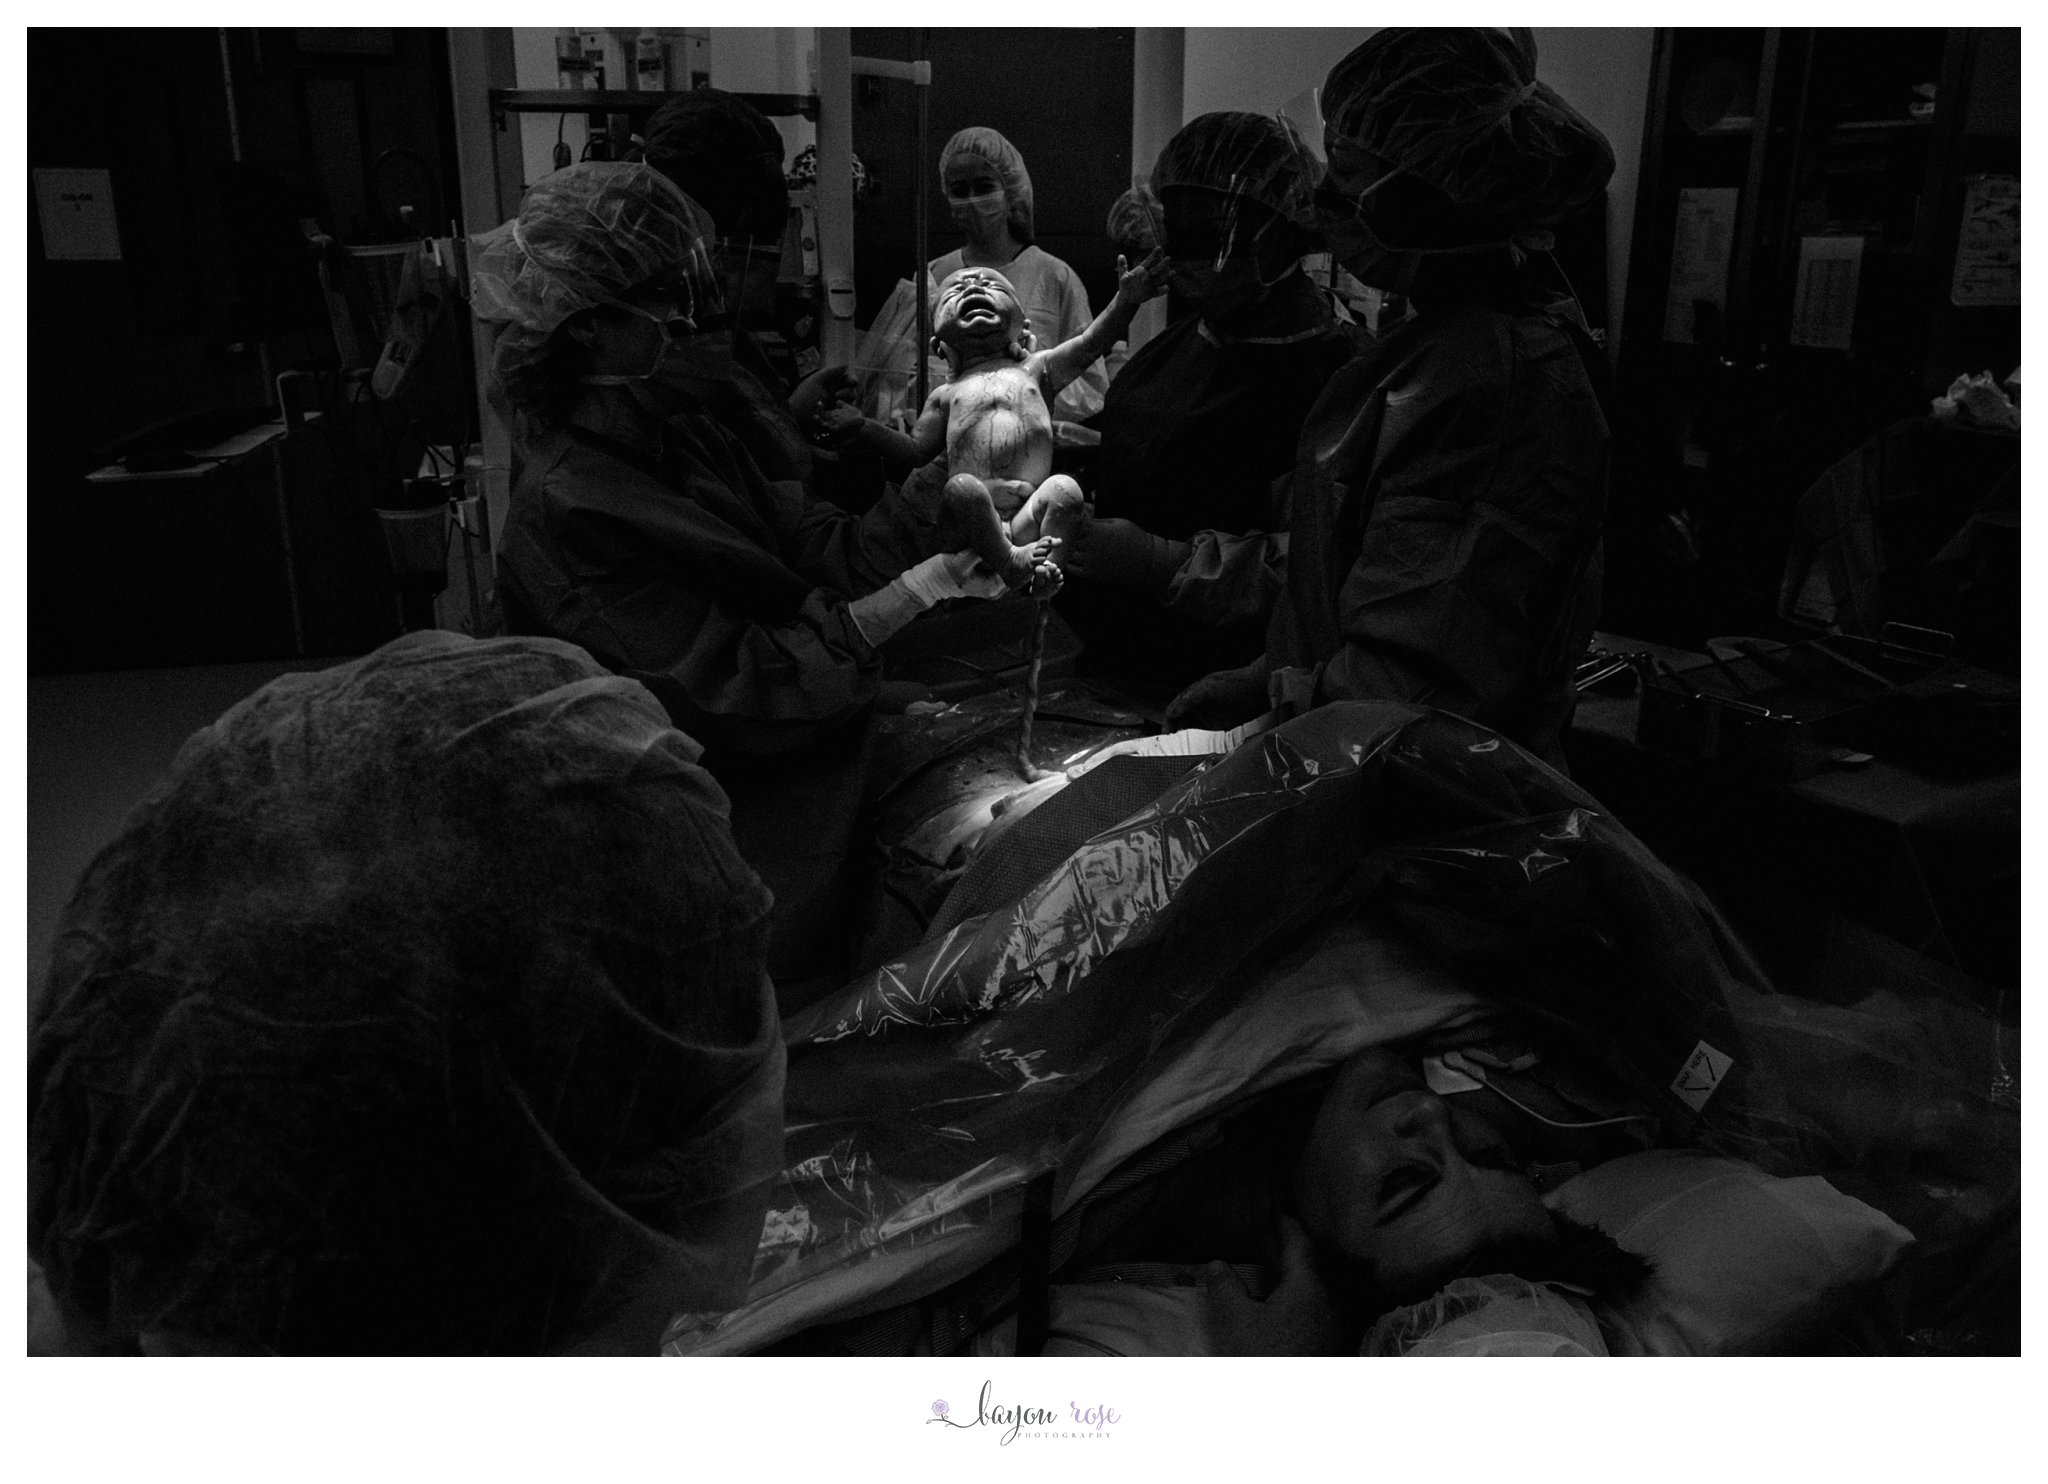 dramatic black and white photo of baby being born during c-section delivery